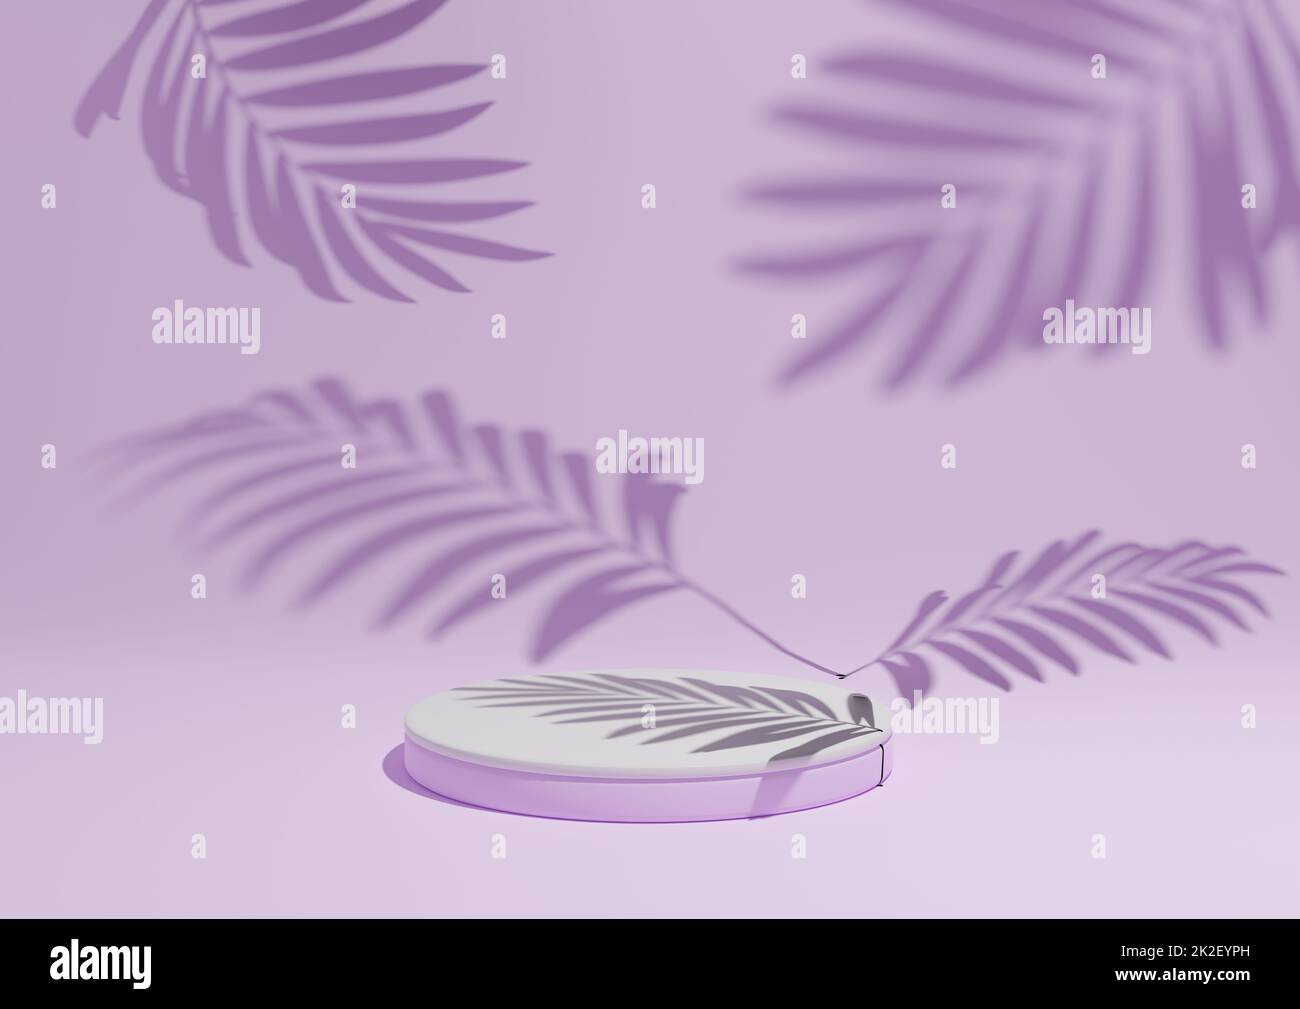 Light, pastel, lavender purple, 3D render of a simple, minimal product display composition backdrop with ont podium or stand and leaf shadows in the background for nature products. Stock Photo